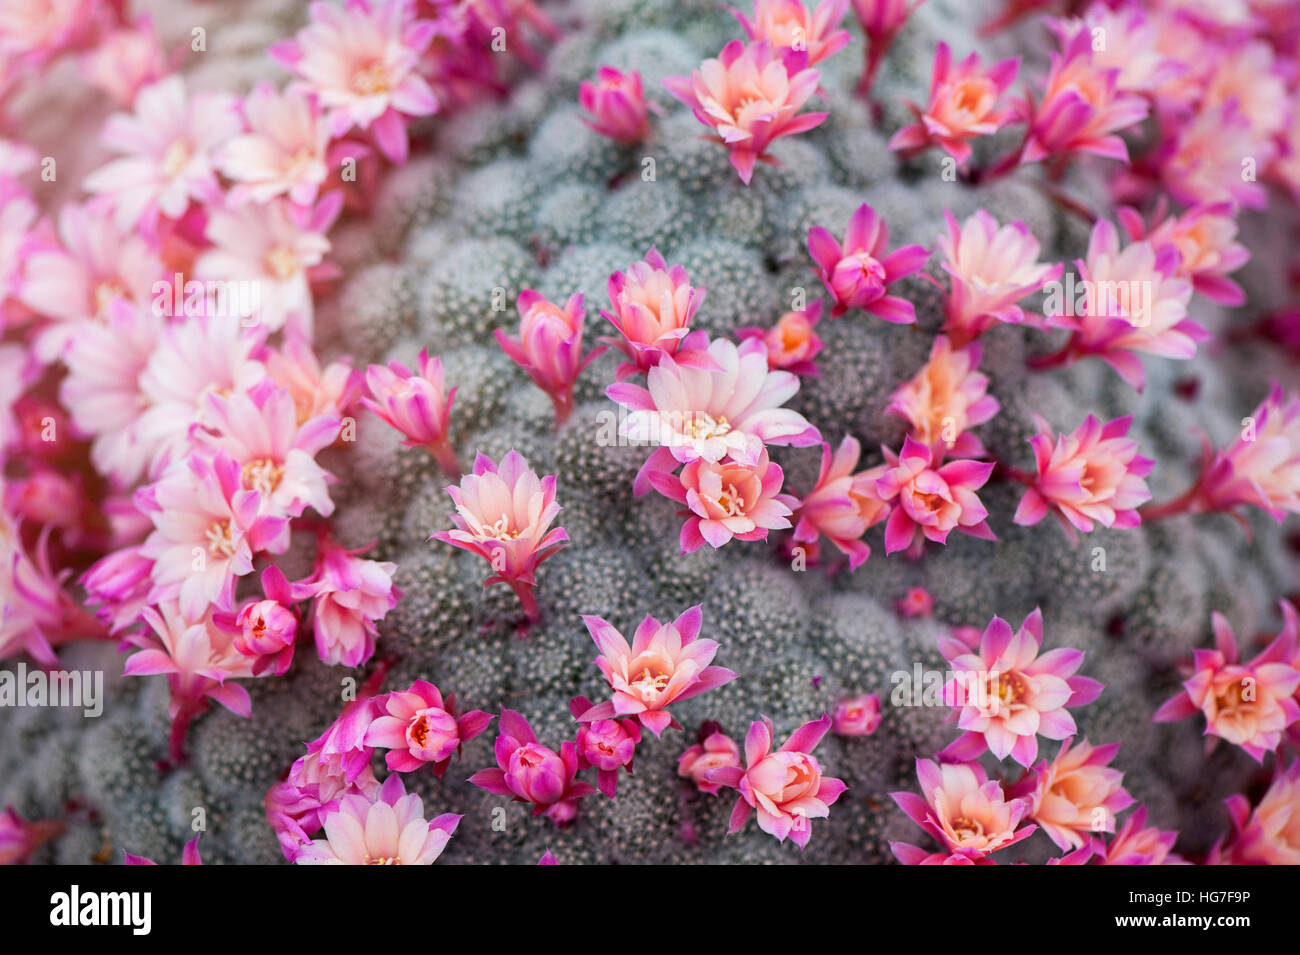 The delicate pink flowers of the cactus plant -  Mammillaria bombycina commonly known as the silken pincushion cactus. Stock Photo